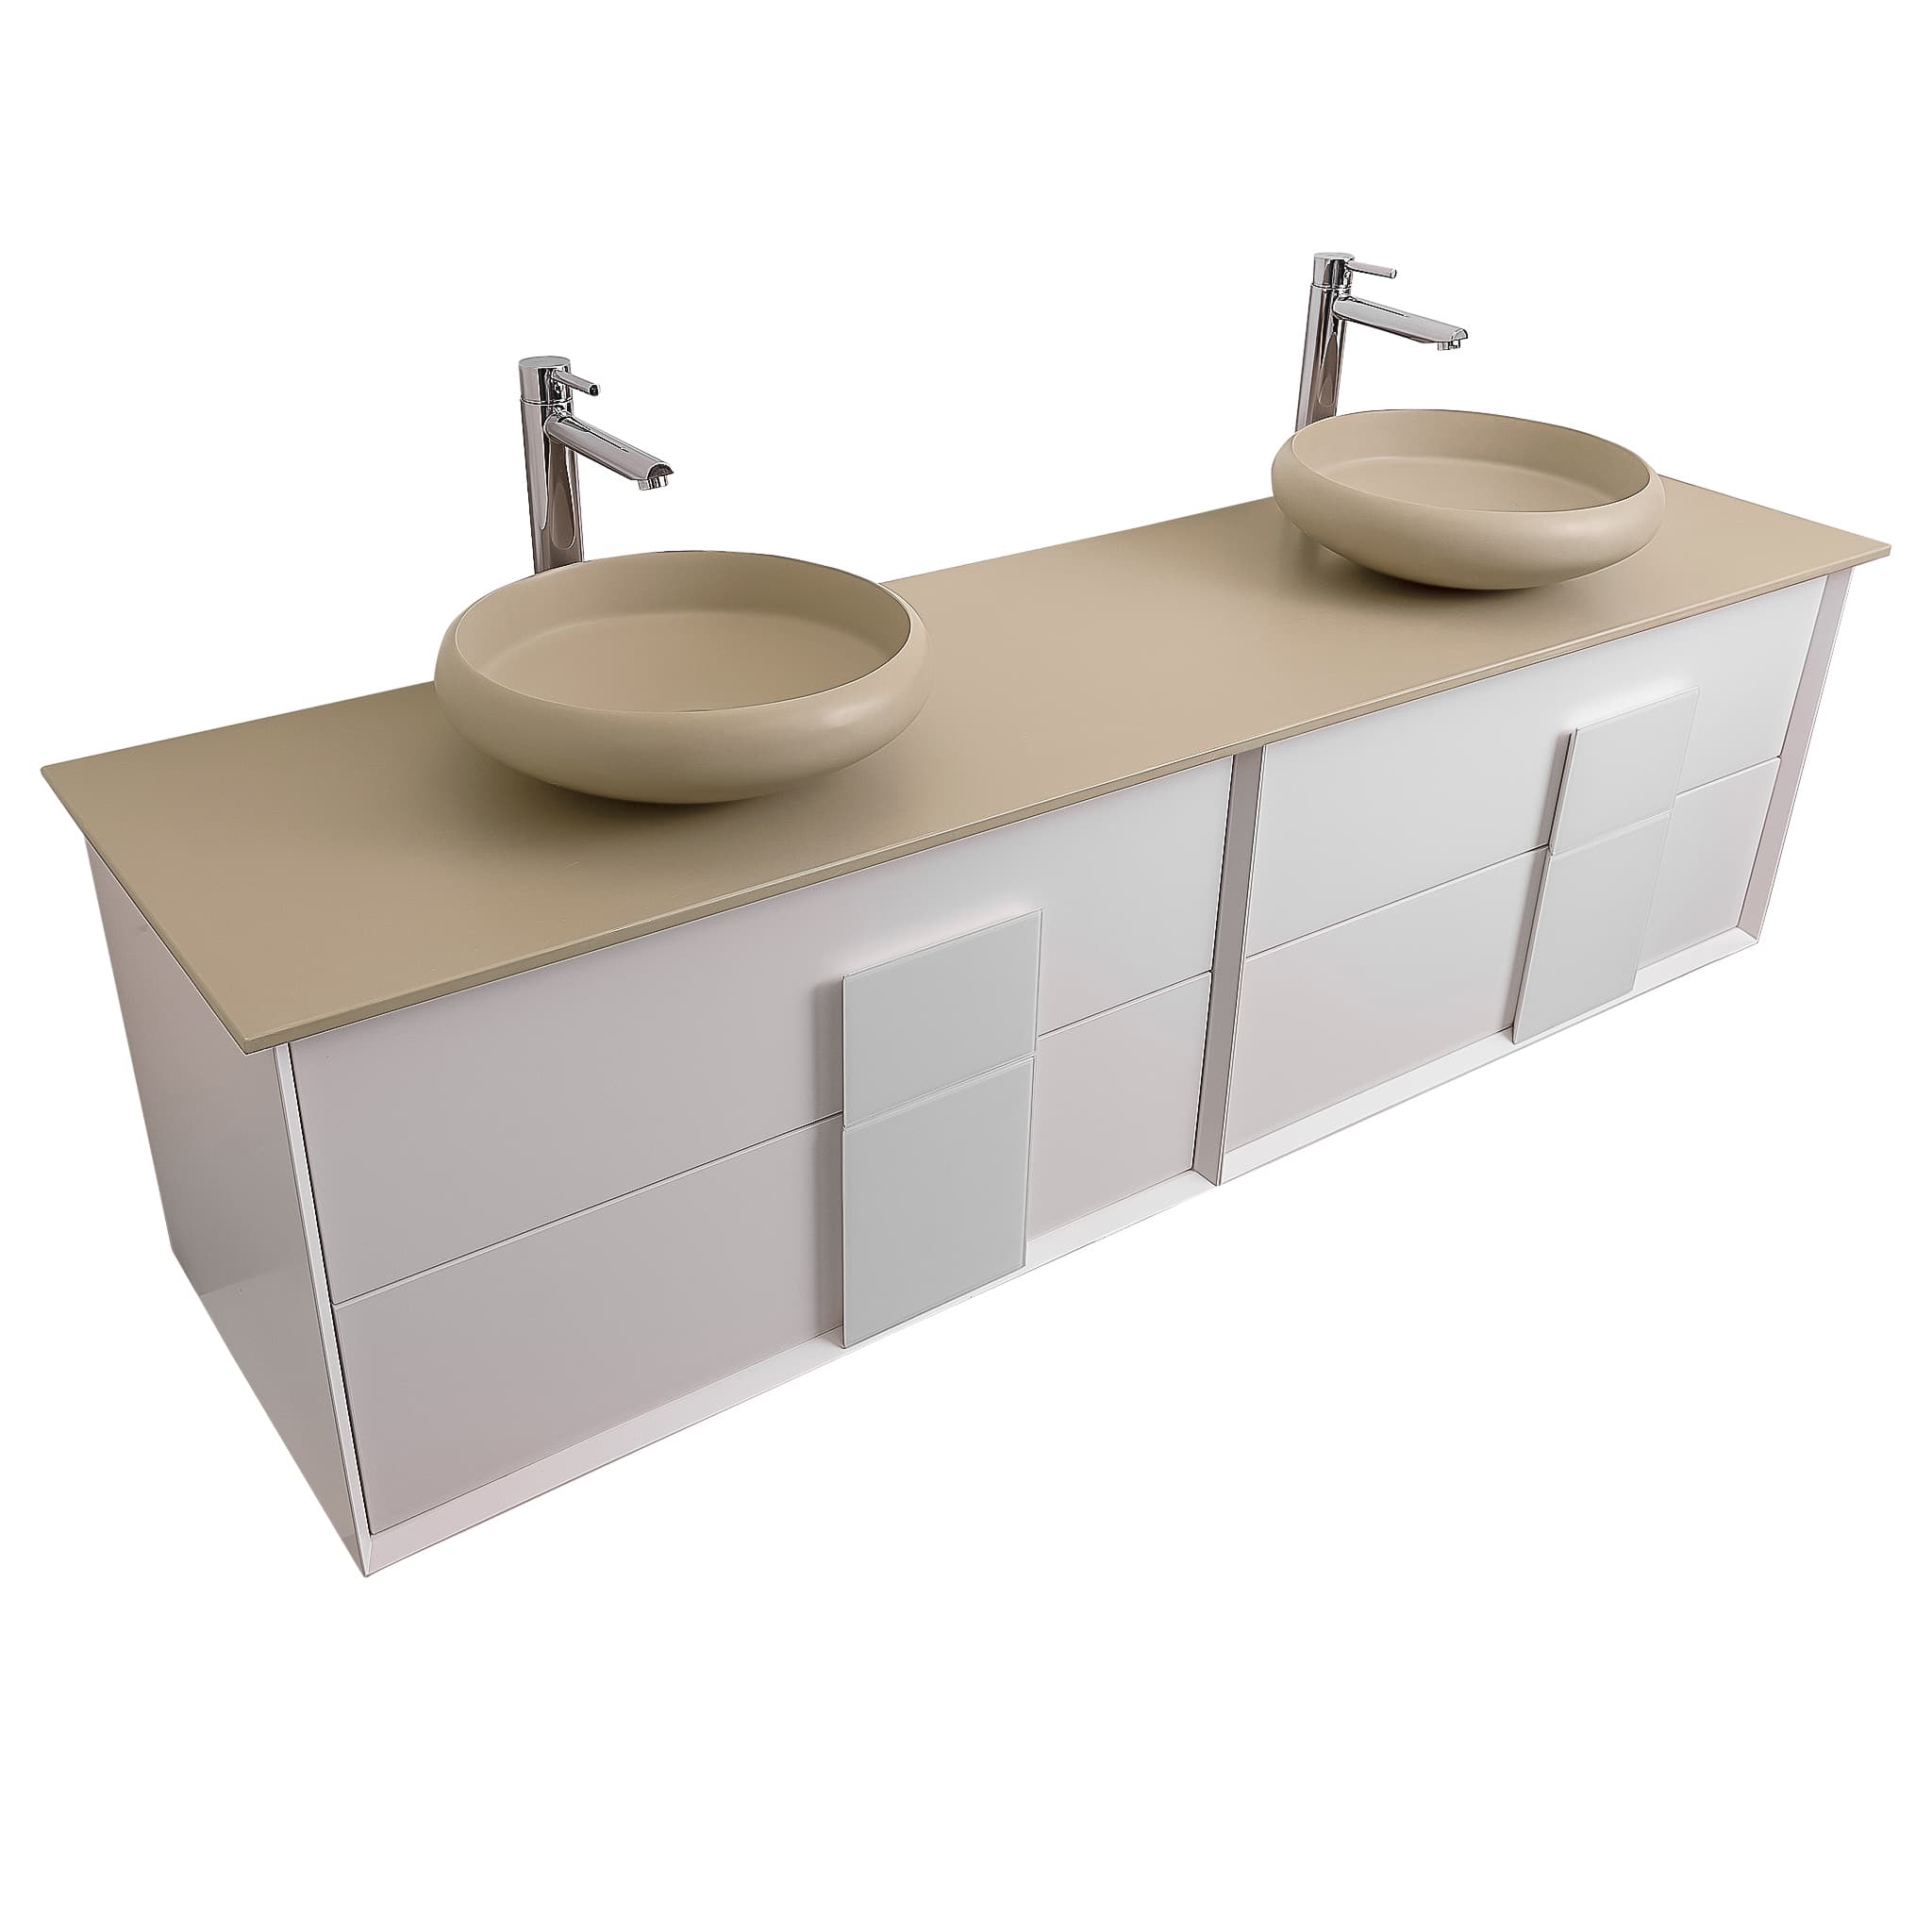 Piazza 63 Matte White With White Handle Cabinet, Solid Surface Flat Taupe Counter and Two Round Solid Surface Taupe Basin 1153, Wall Mounted Modern Vanity Set